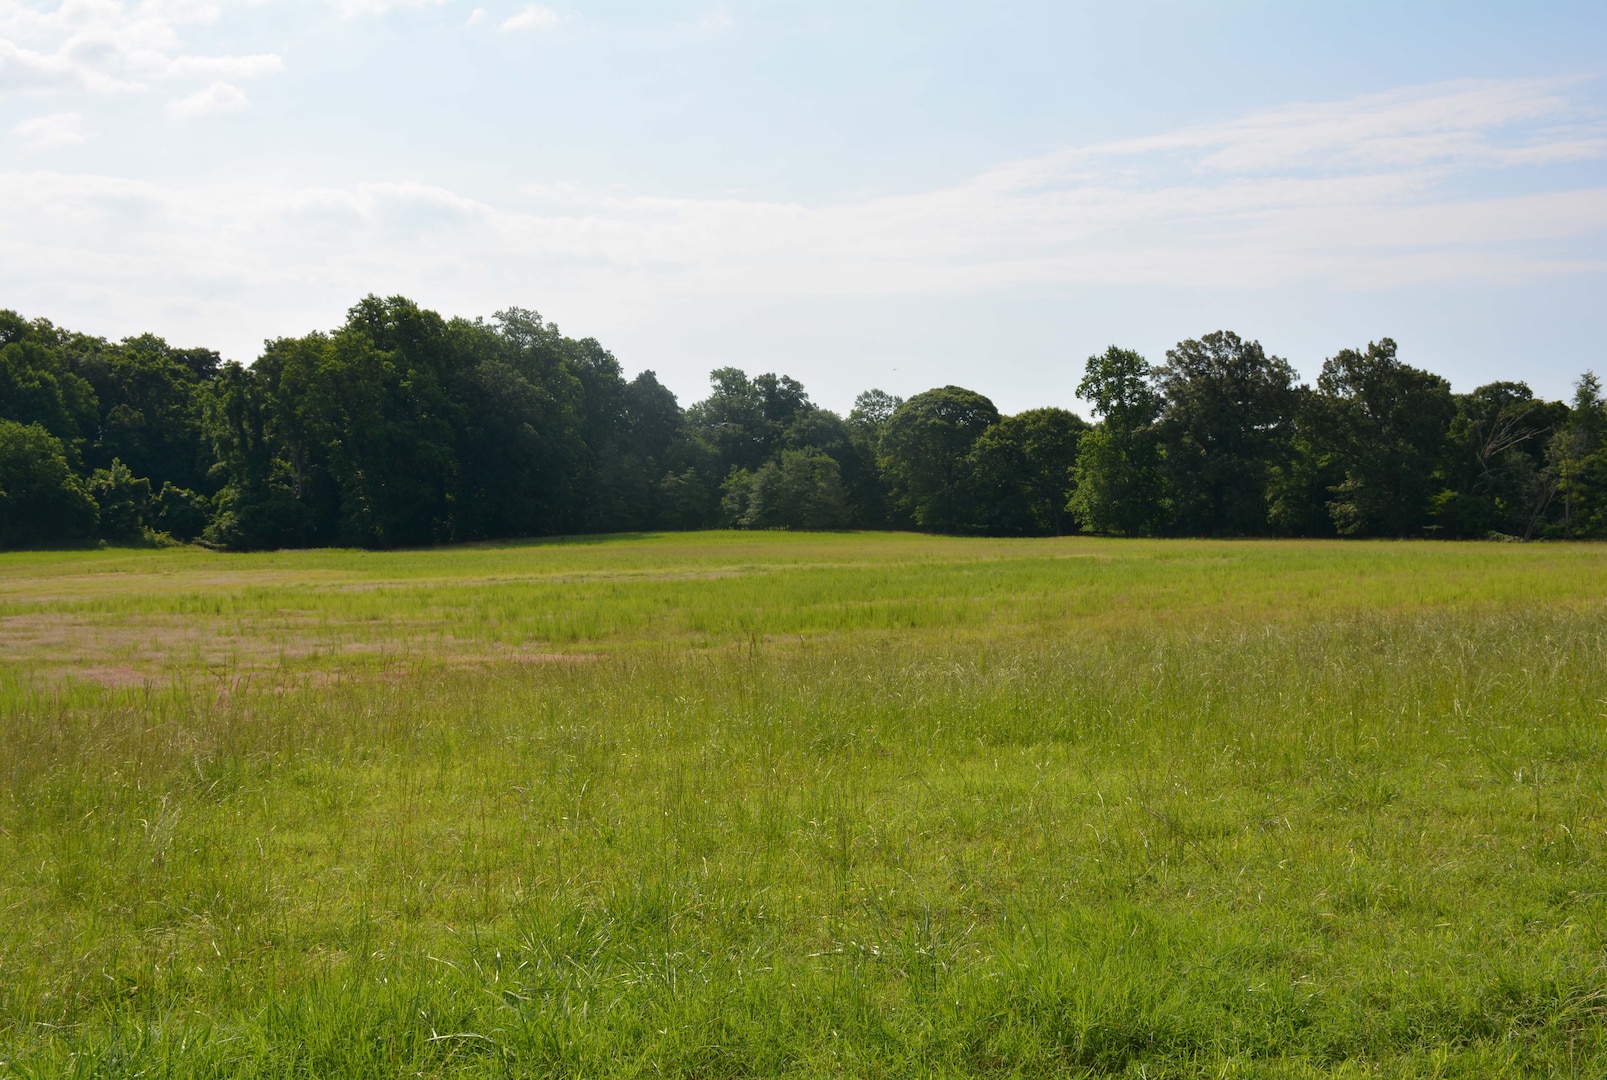 A field where underground fuel was formerly stored. The grass is green and trees appear in the distance.